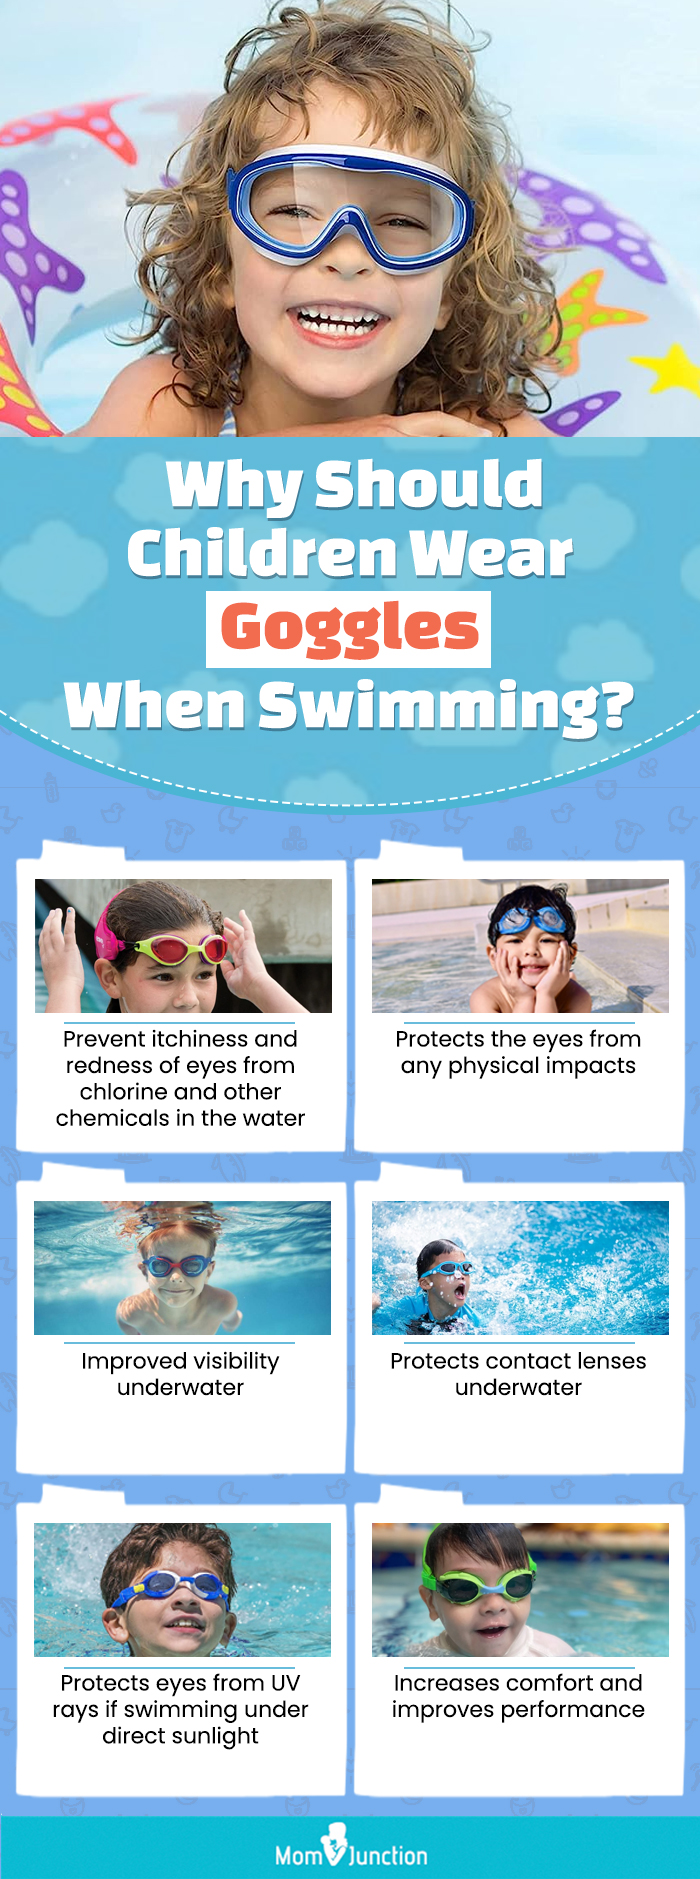 Why Should Children Wear Goggles When Swimming (infographic)